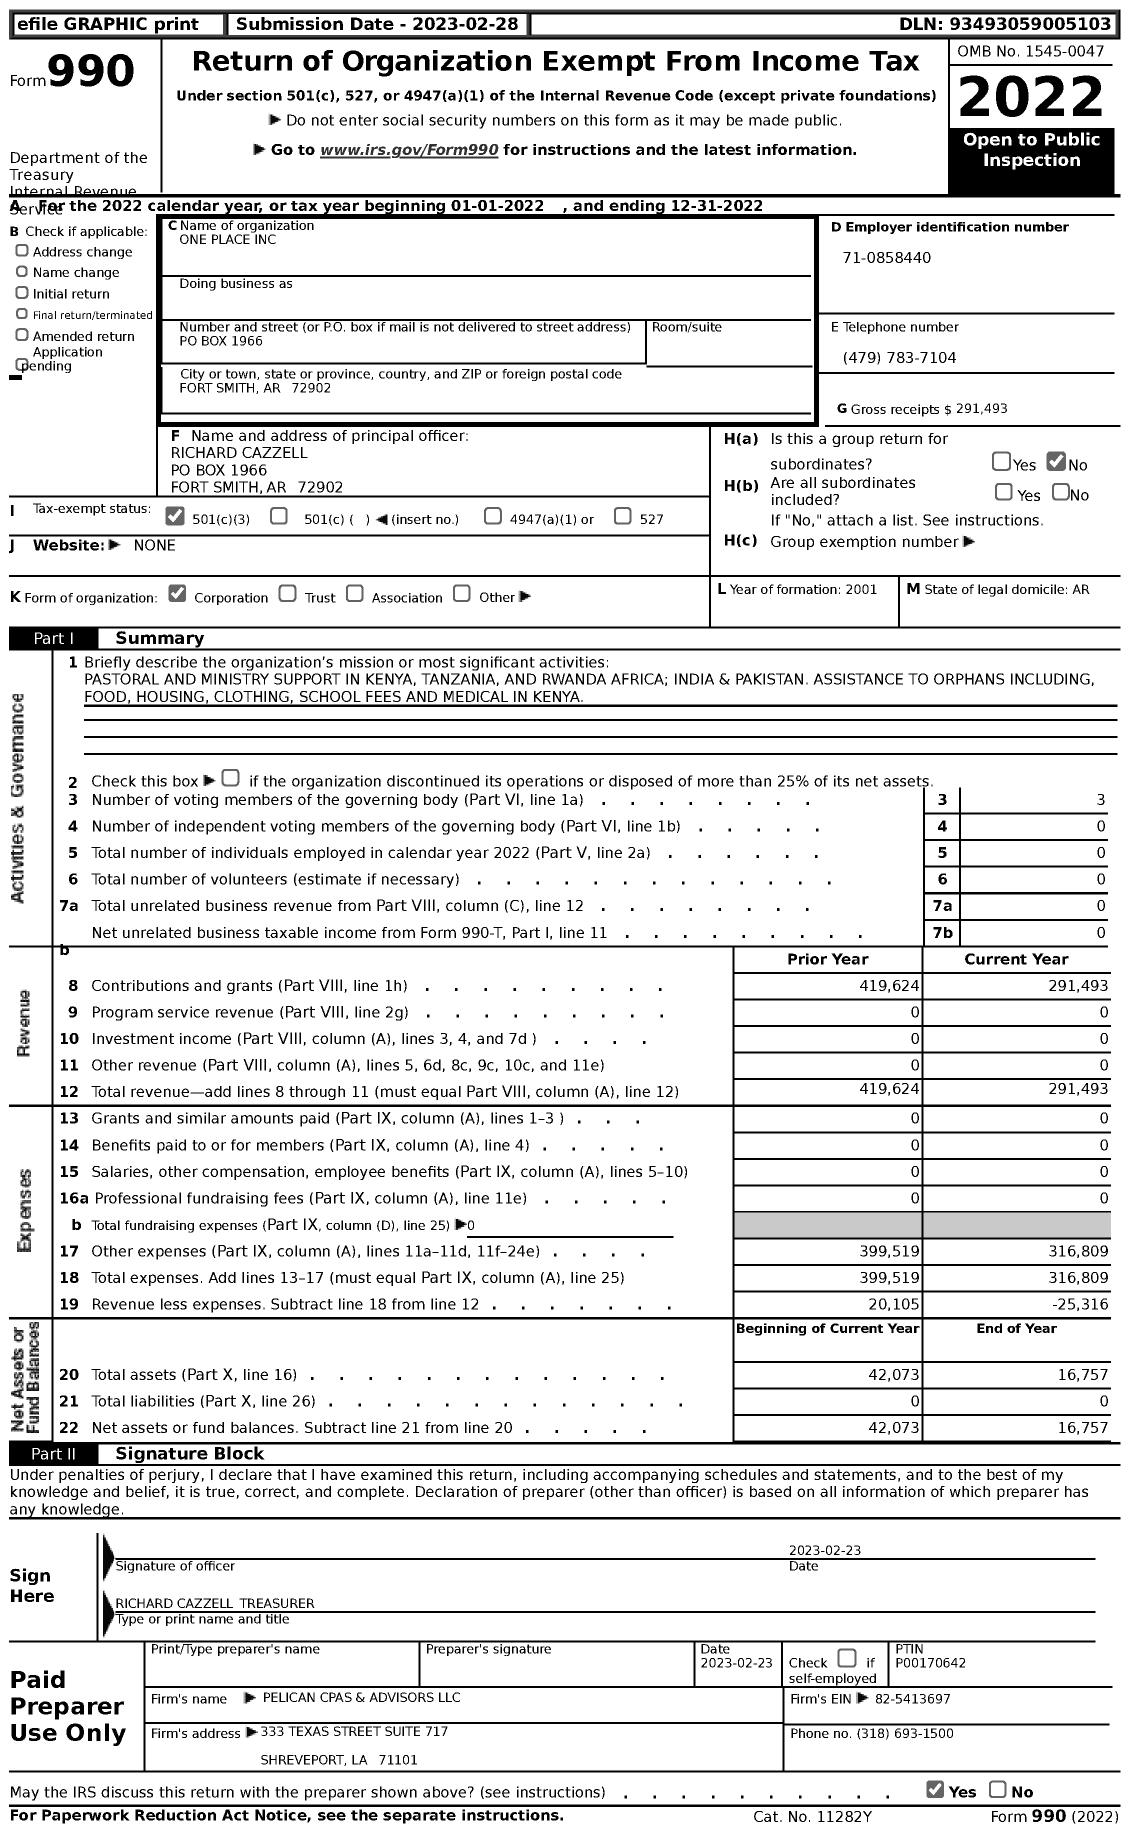 Image of first page of 2022 Form 990 for One Place